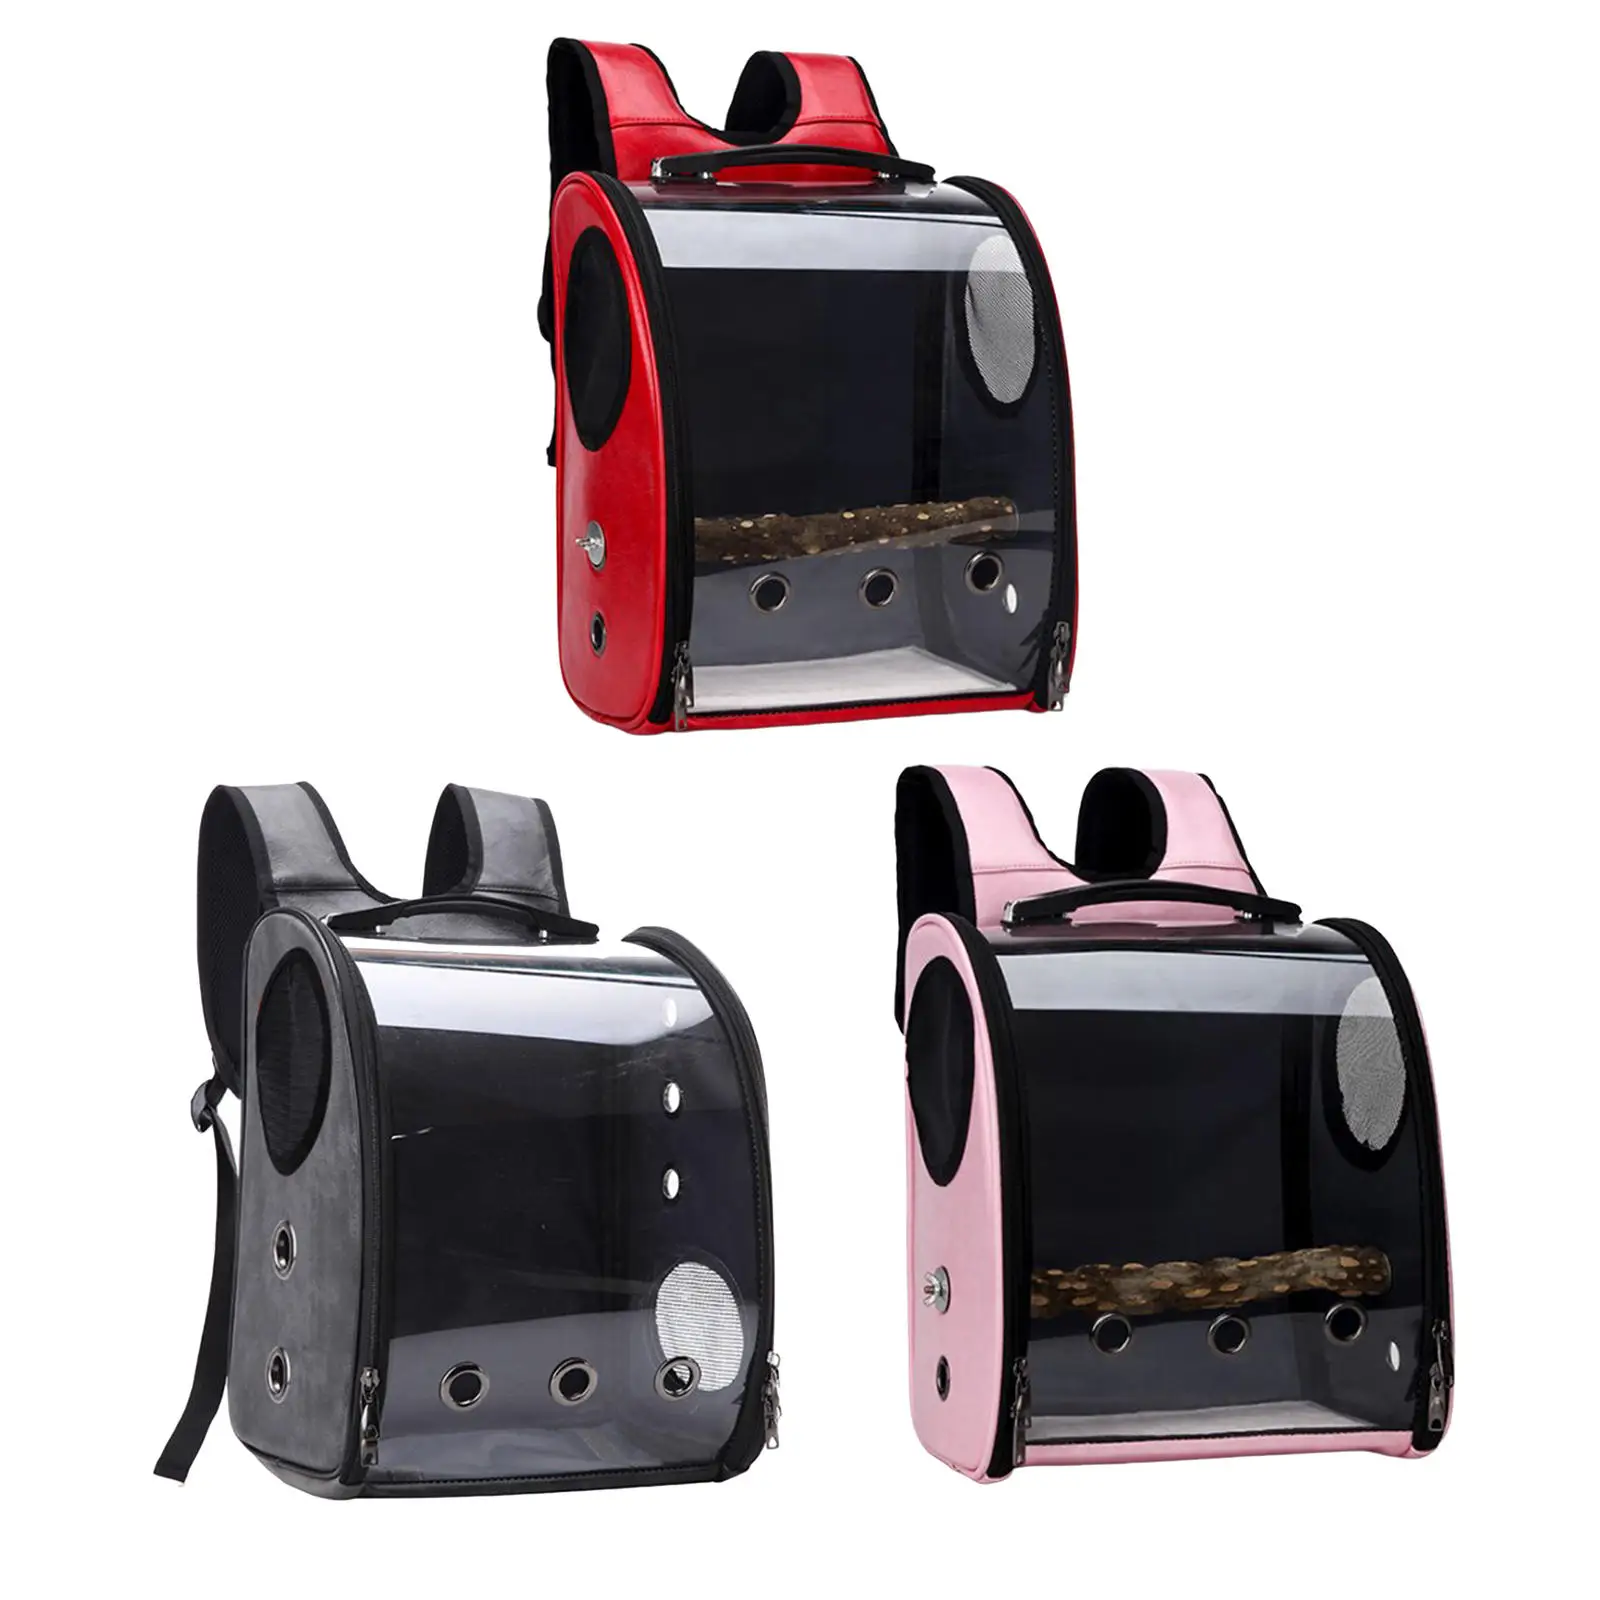 Bird Parrot Pet Carrier Cage Travel Bag Transport Breathable Parrot Go Out Capsule Transparent Space Carry Panoramic Design